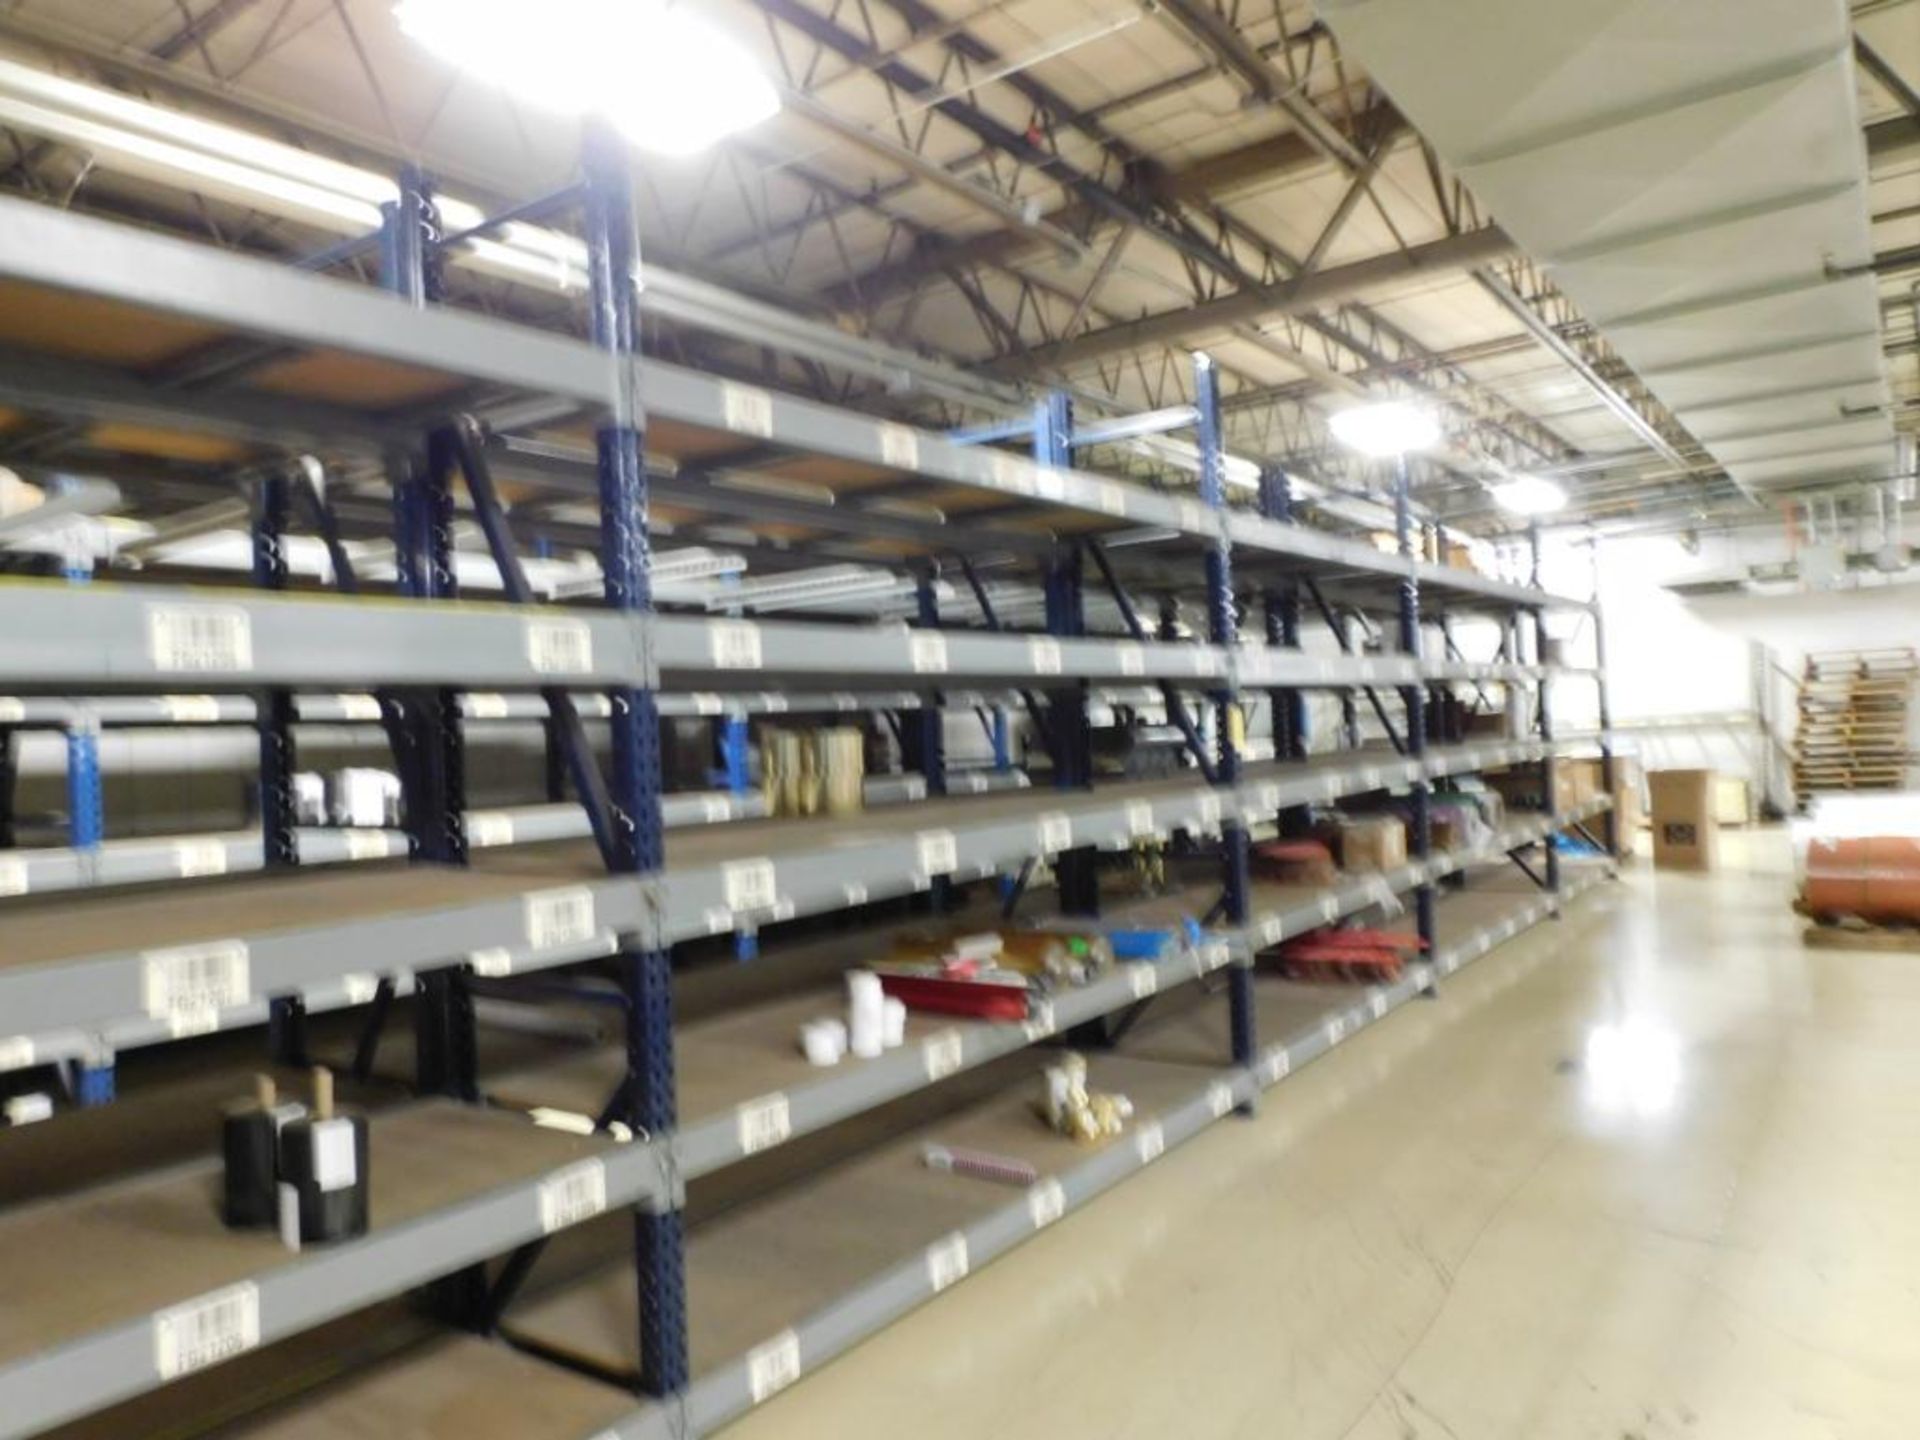 LOT: (24) Sections Pallet Racking w/(5) Shelves per Section, 10 ft. length x 30 in. Wide x 10 ft. Hi - Image 2 of 5